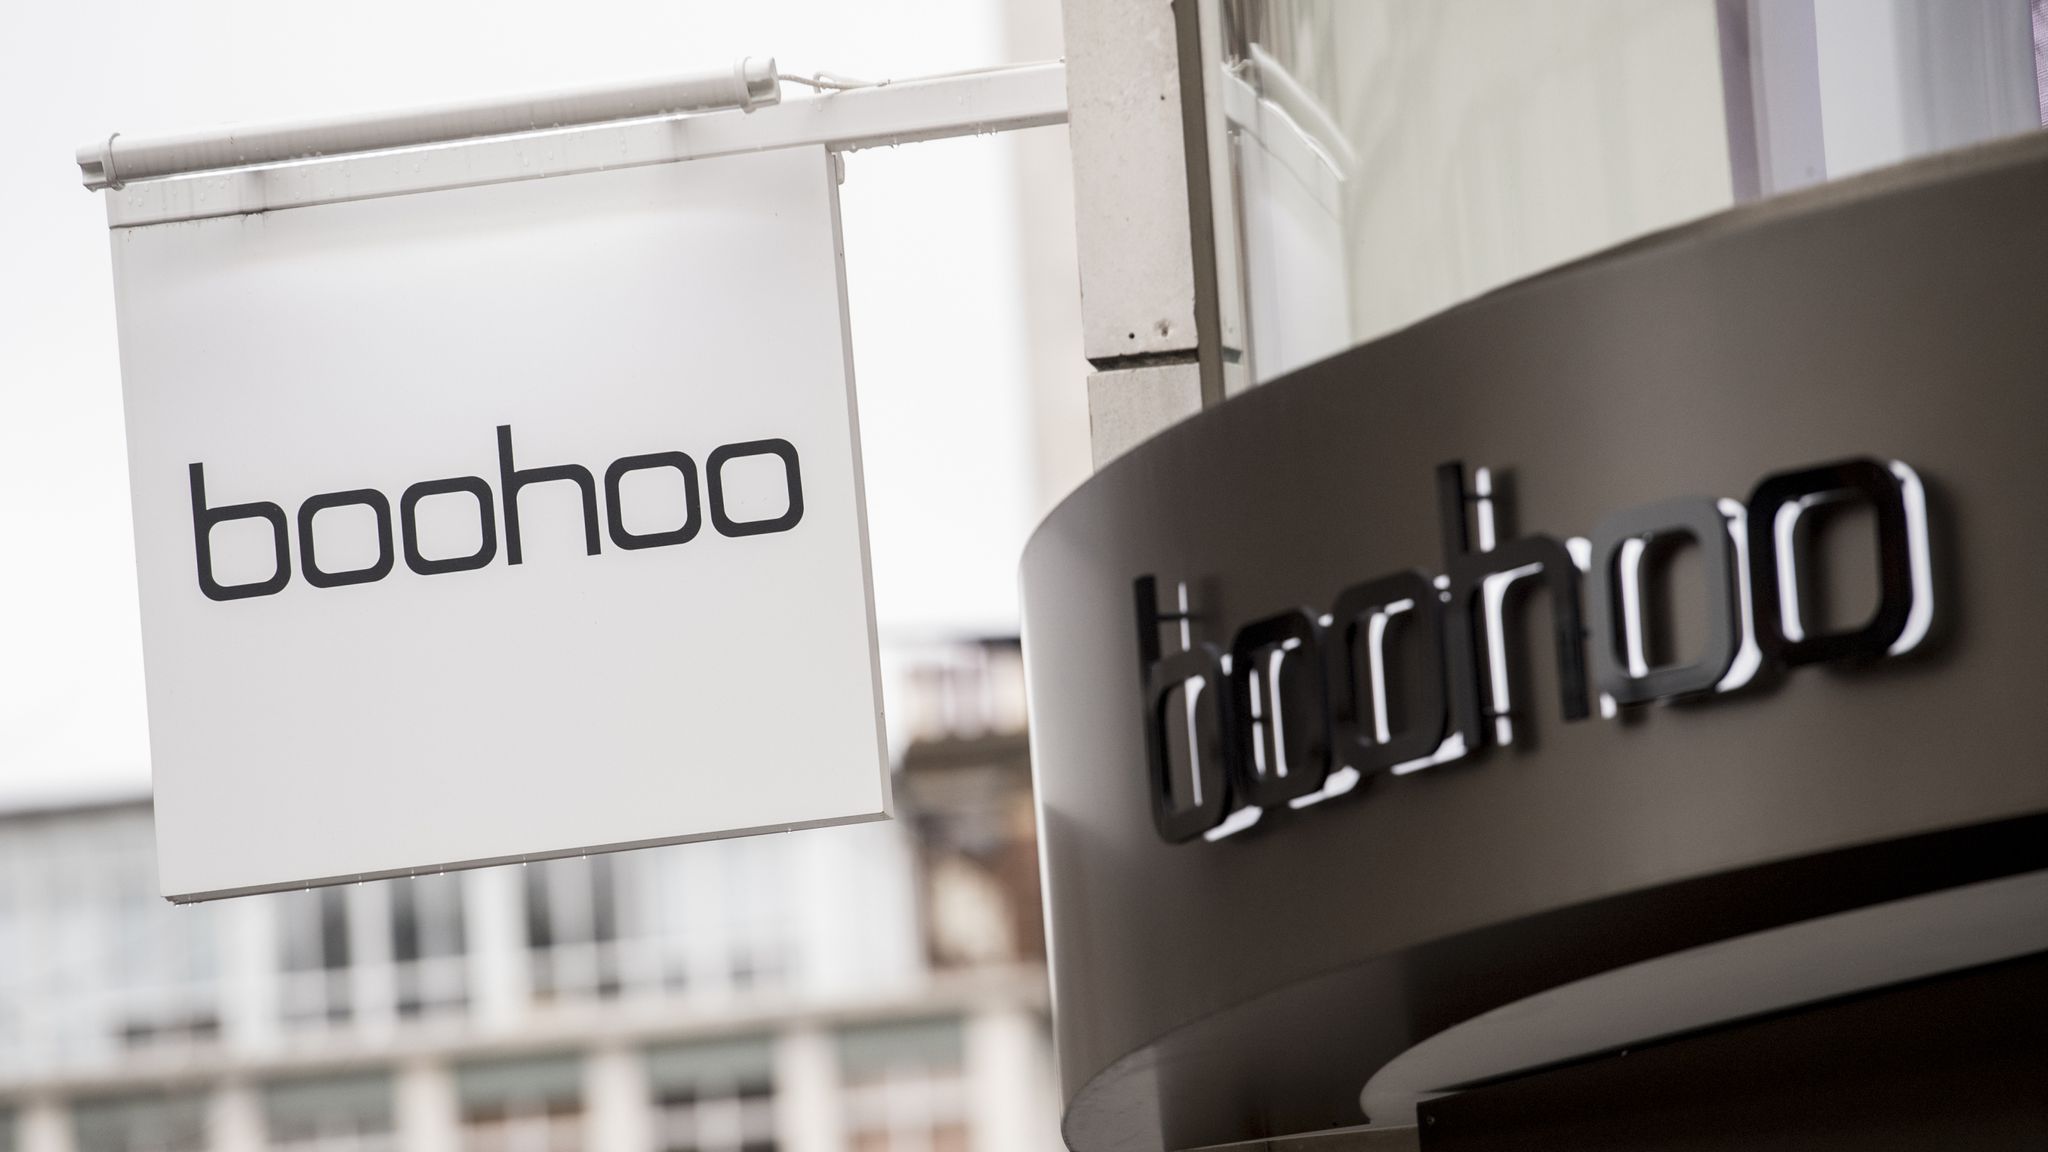 Boohoo under renewed pressure as firm urged to link bonuses to progress on  workers&#39; rights | Business News | Sky News